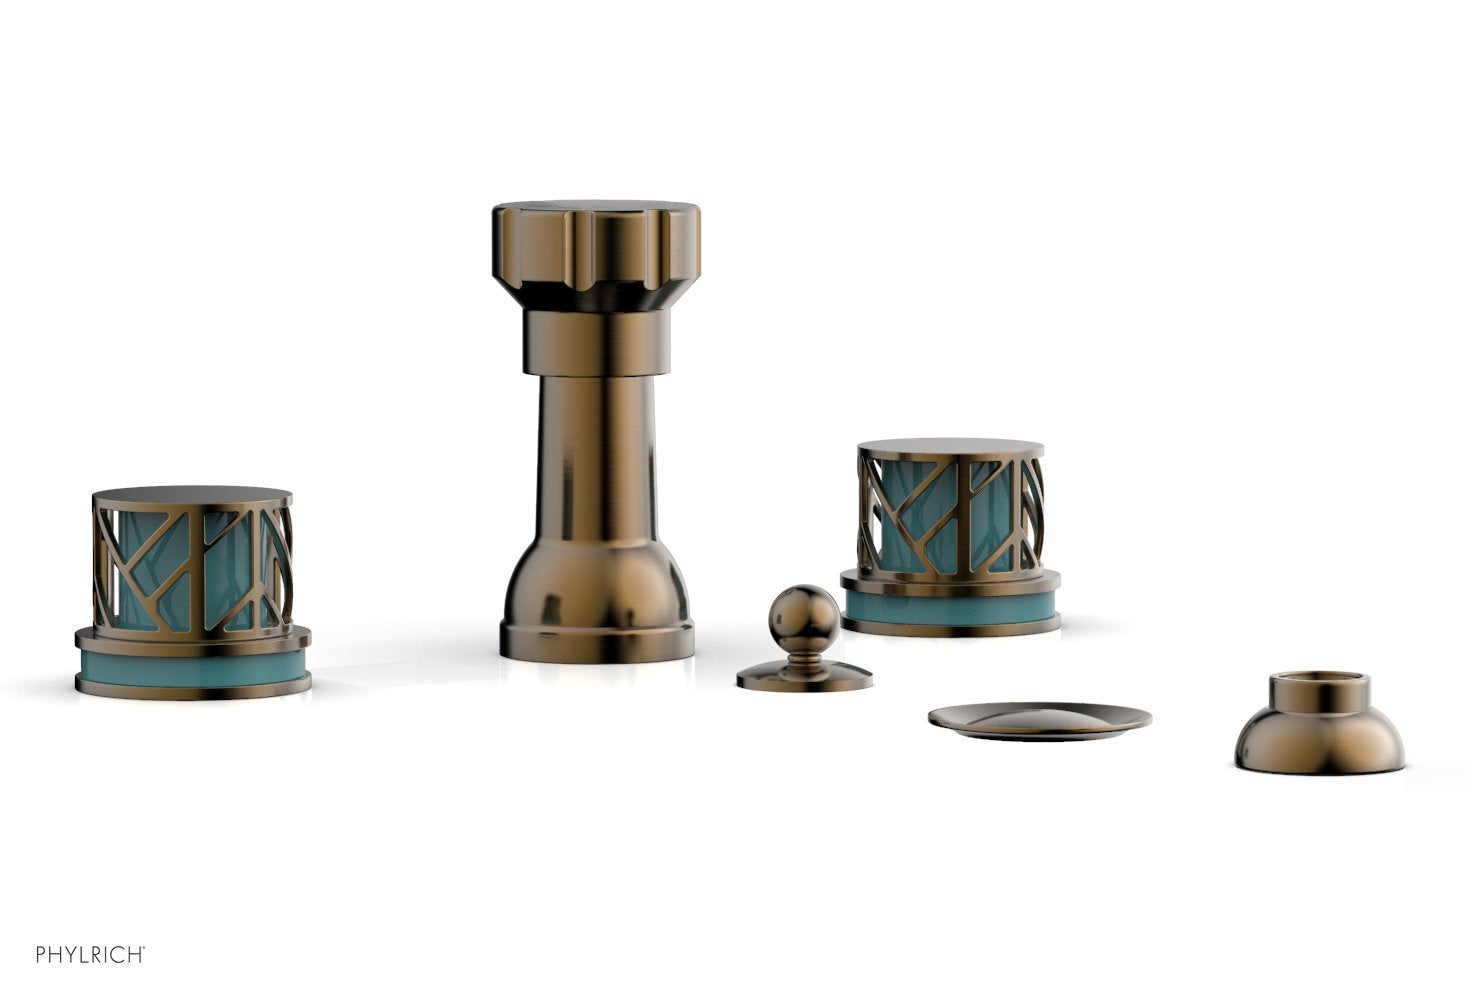 Phylrich JOLIE Four Hole Bidet Set - Round Handles with "Turquoise Accents"